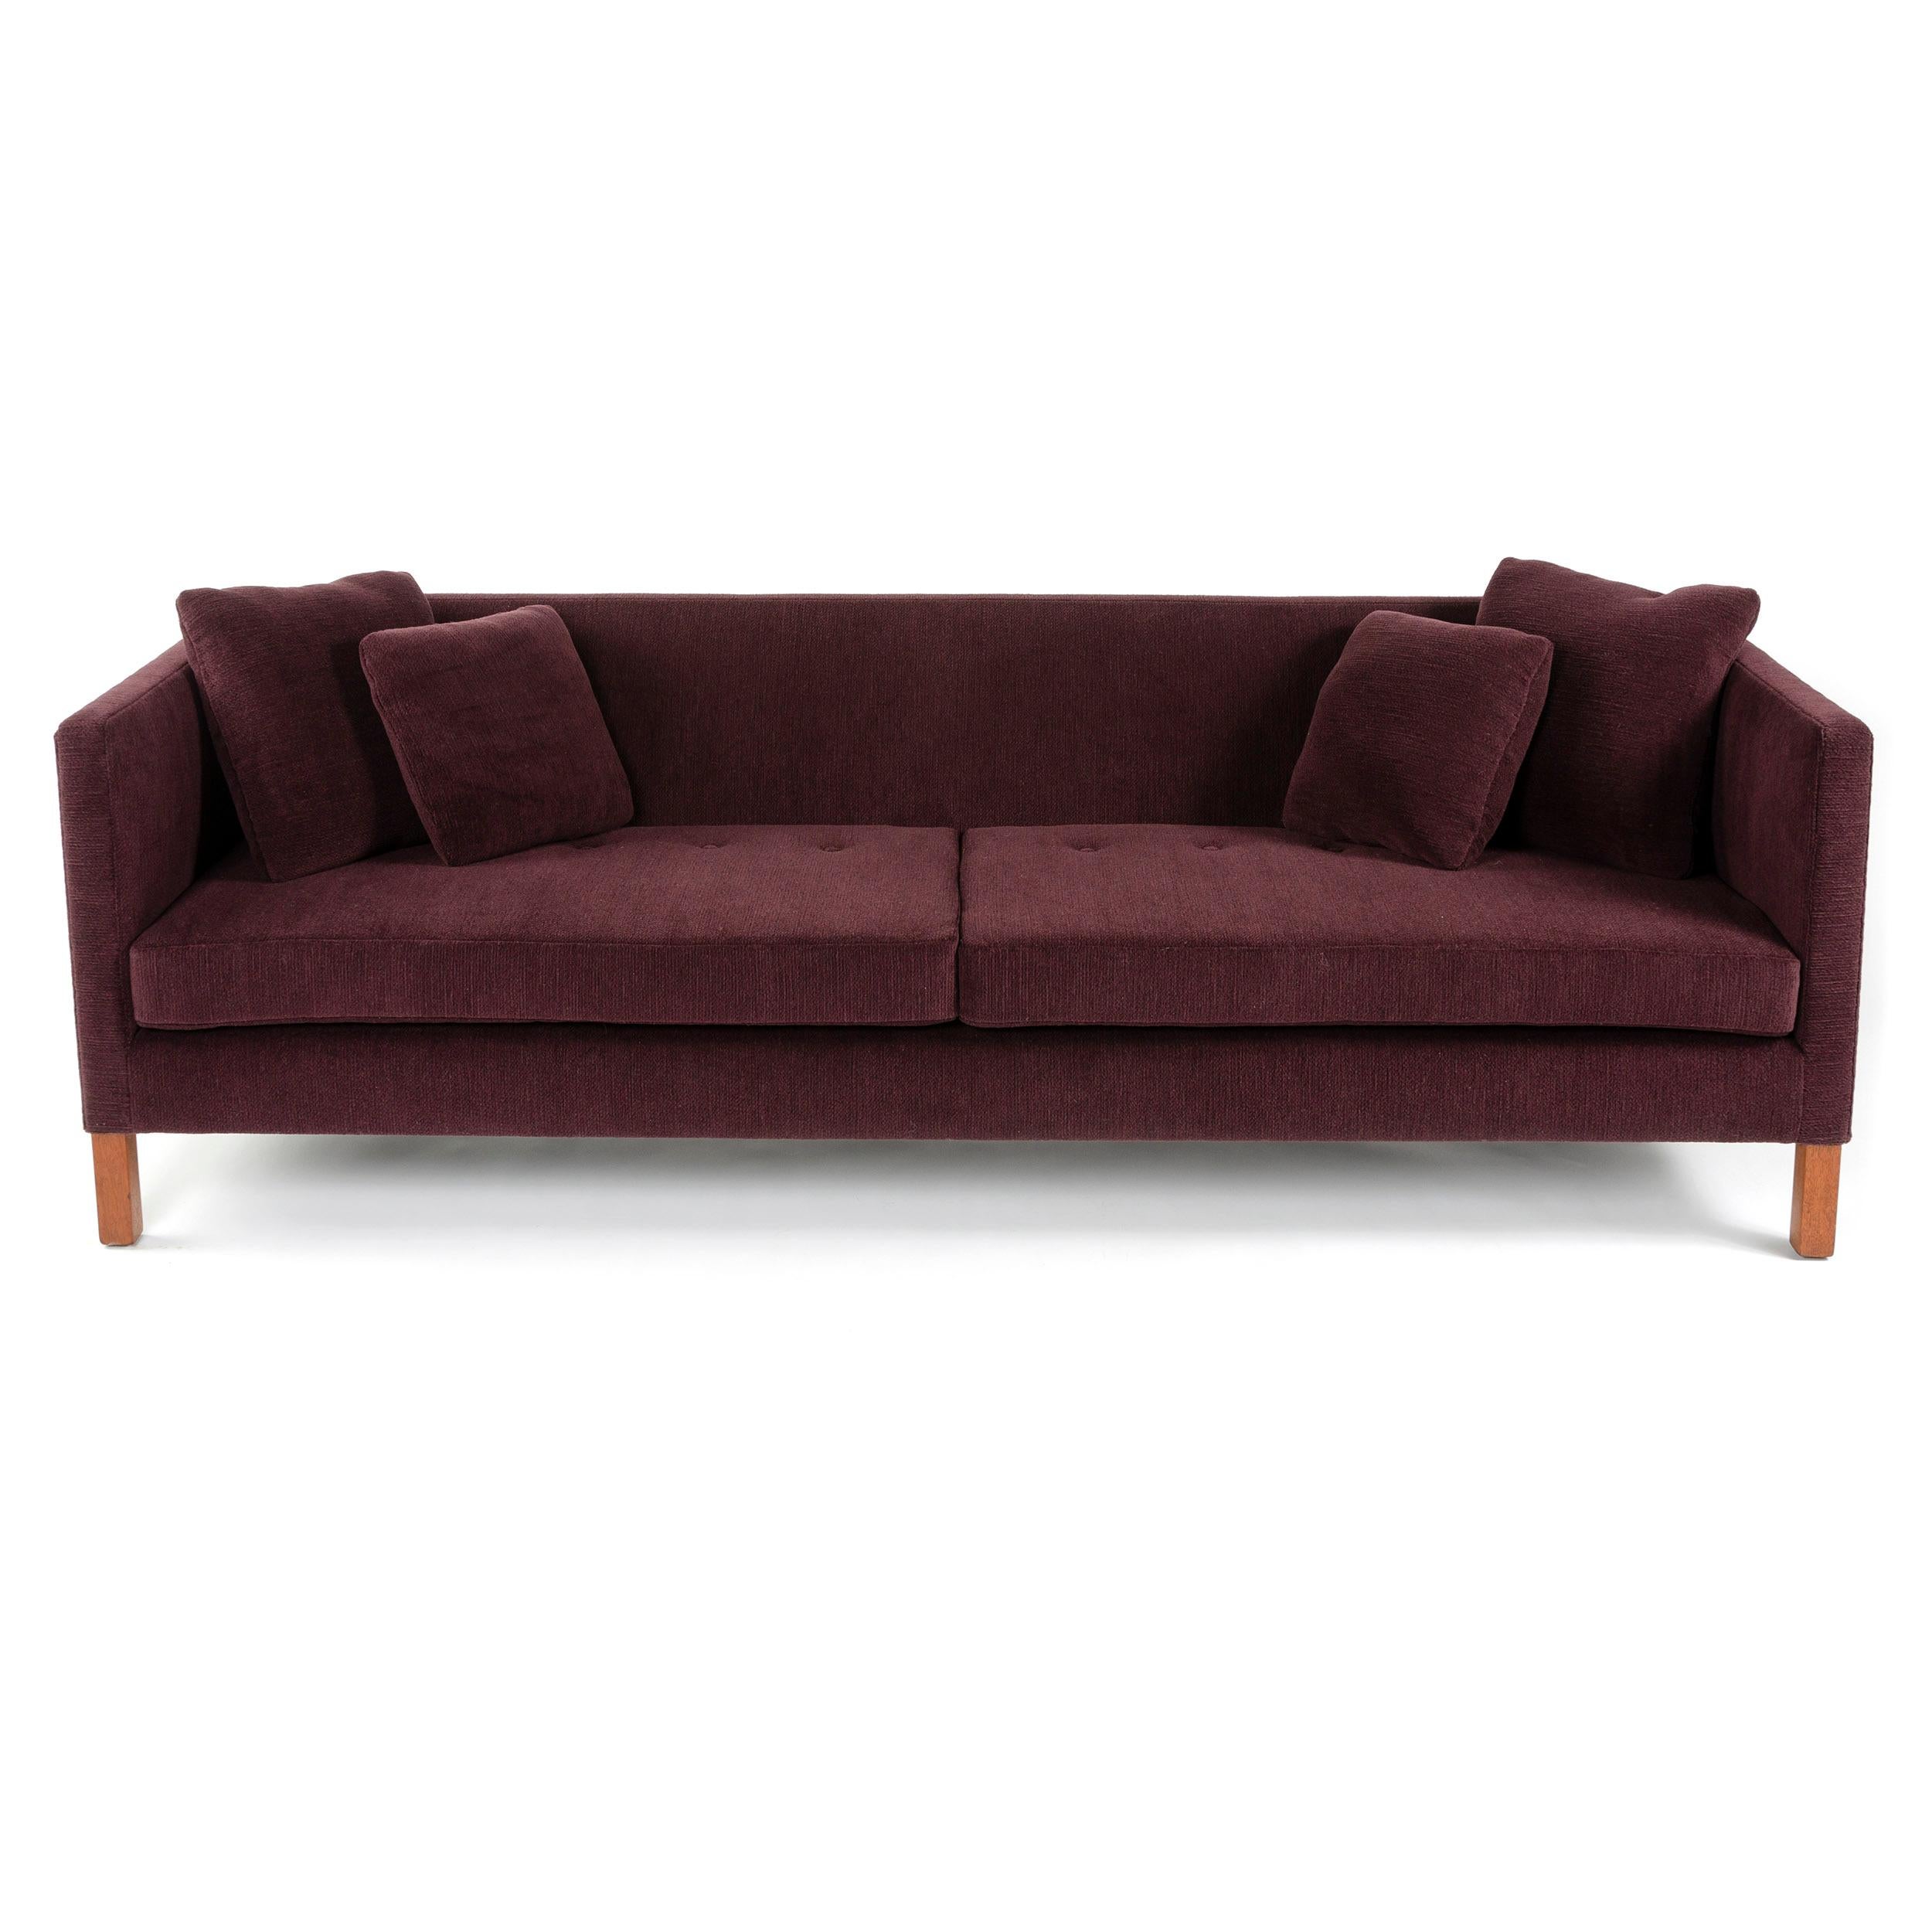 A Dunbar square arm sofa designed by Edward Wormley with two slab seat cushions and four pillows. Newly reupholstered in a burgundy wool chenille.